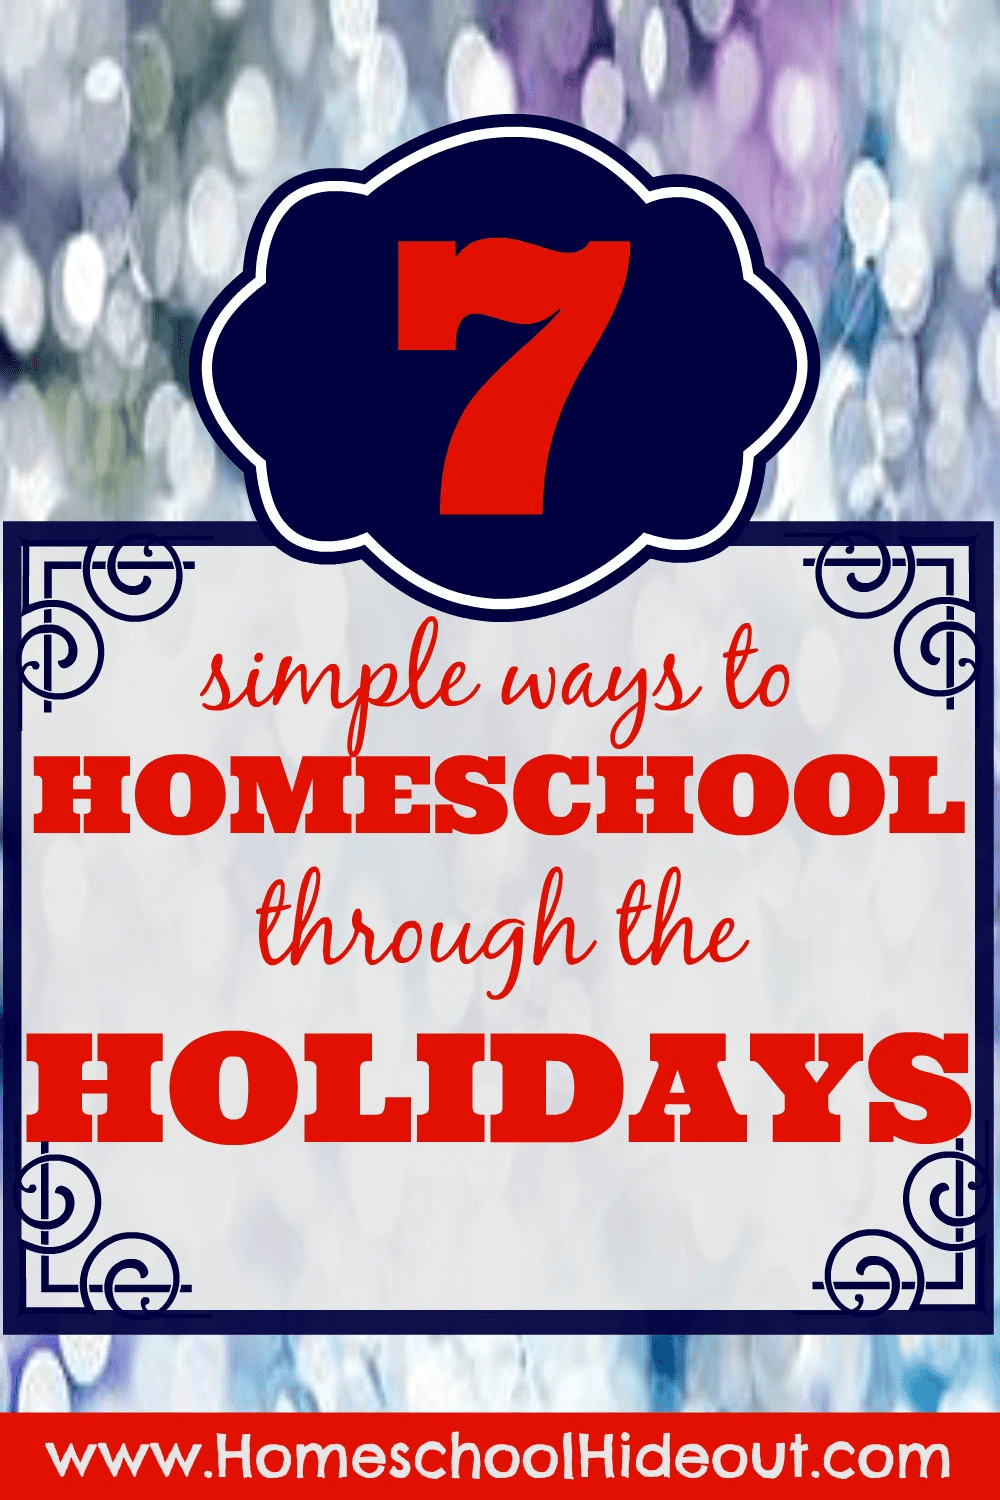 These tips are PERFECT for motivating me to homeschool through the holidays. #6 is my favorite!!!